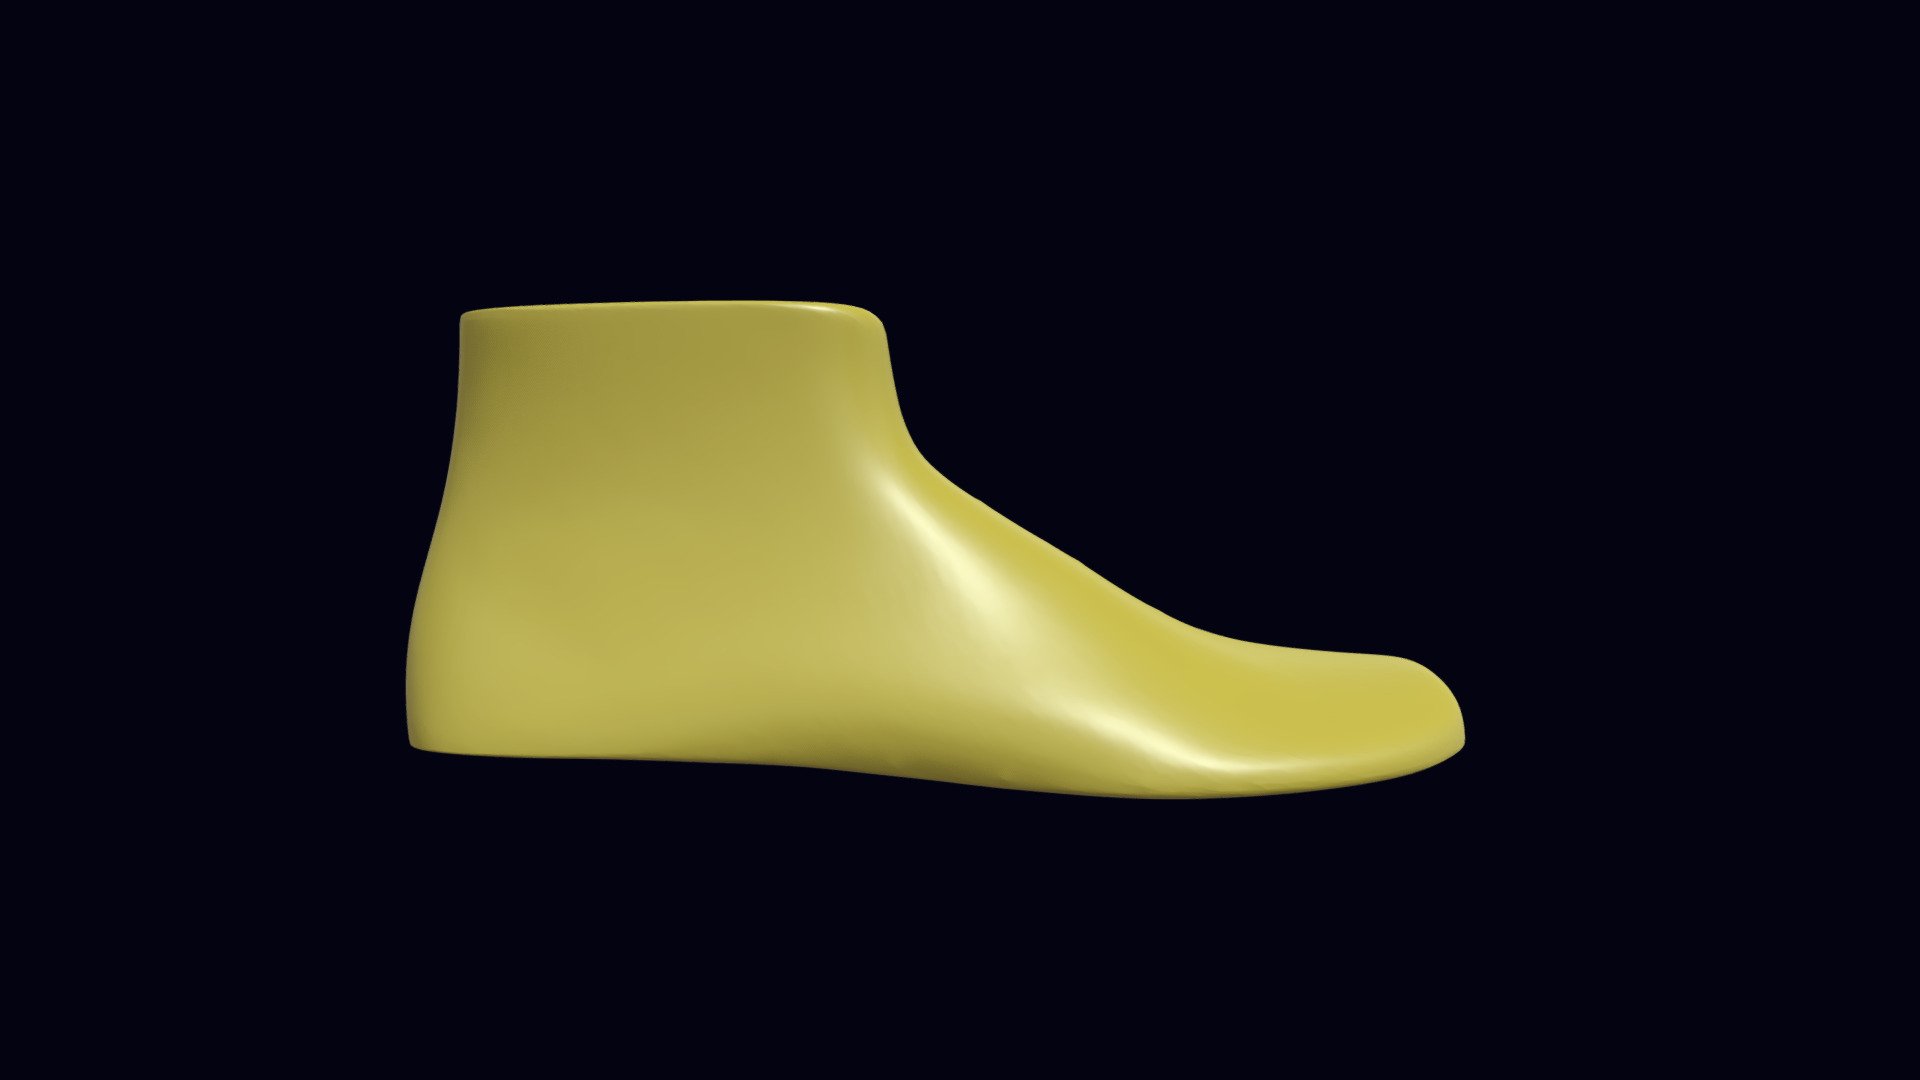 For sales and enquiries, please email me on footwearservices@outlook.com. Sketchfab does not recognise traditional STL shoe last files as suitable &ldquo;sellable content